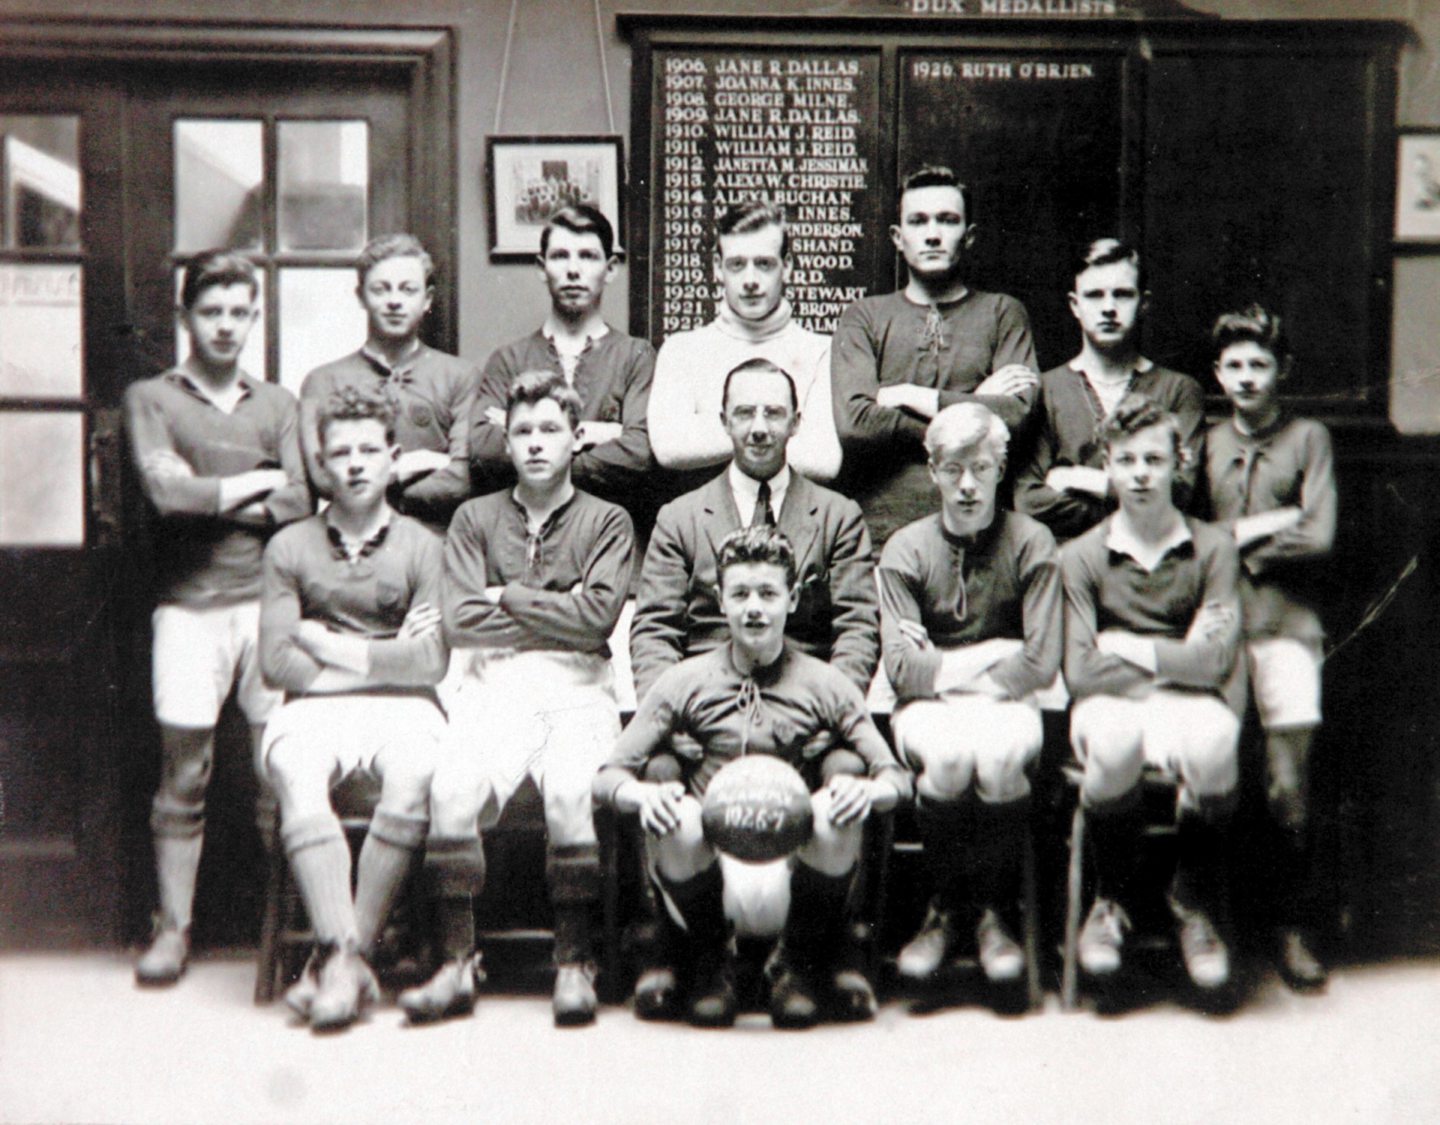 One of the photos of Inverurie Academy football team in 1926